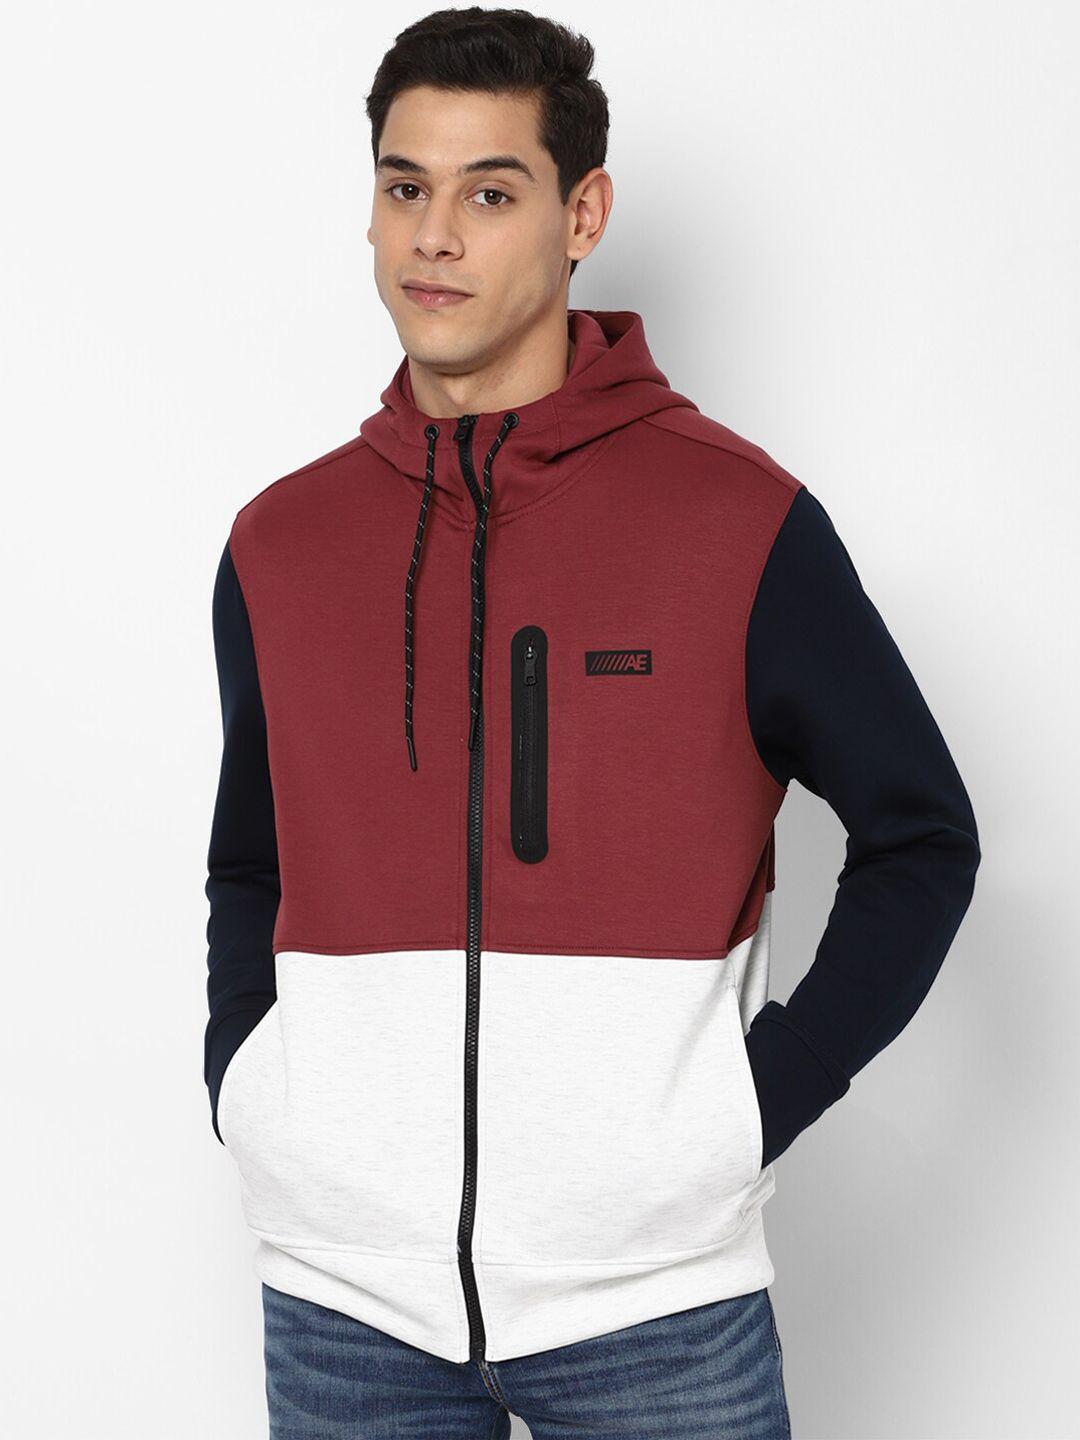 american-eagle-outfitters-men-red-colourblocked-hooded-sweatshirt